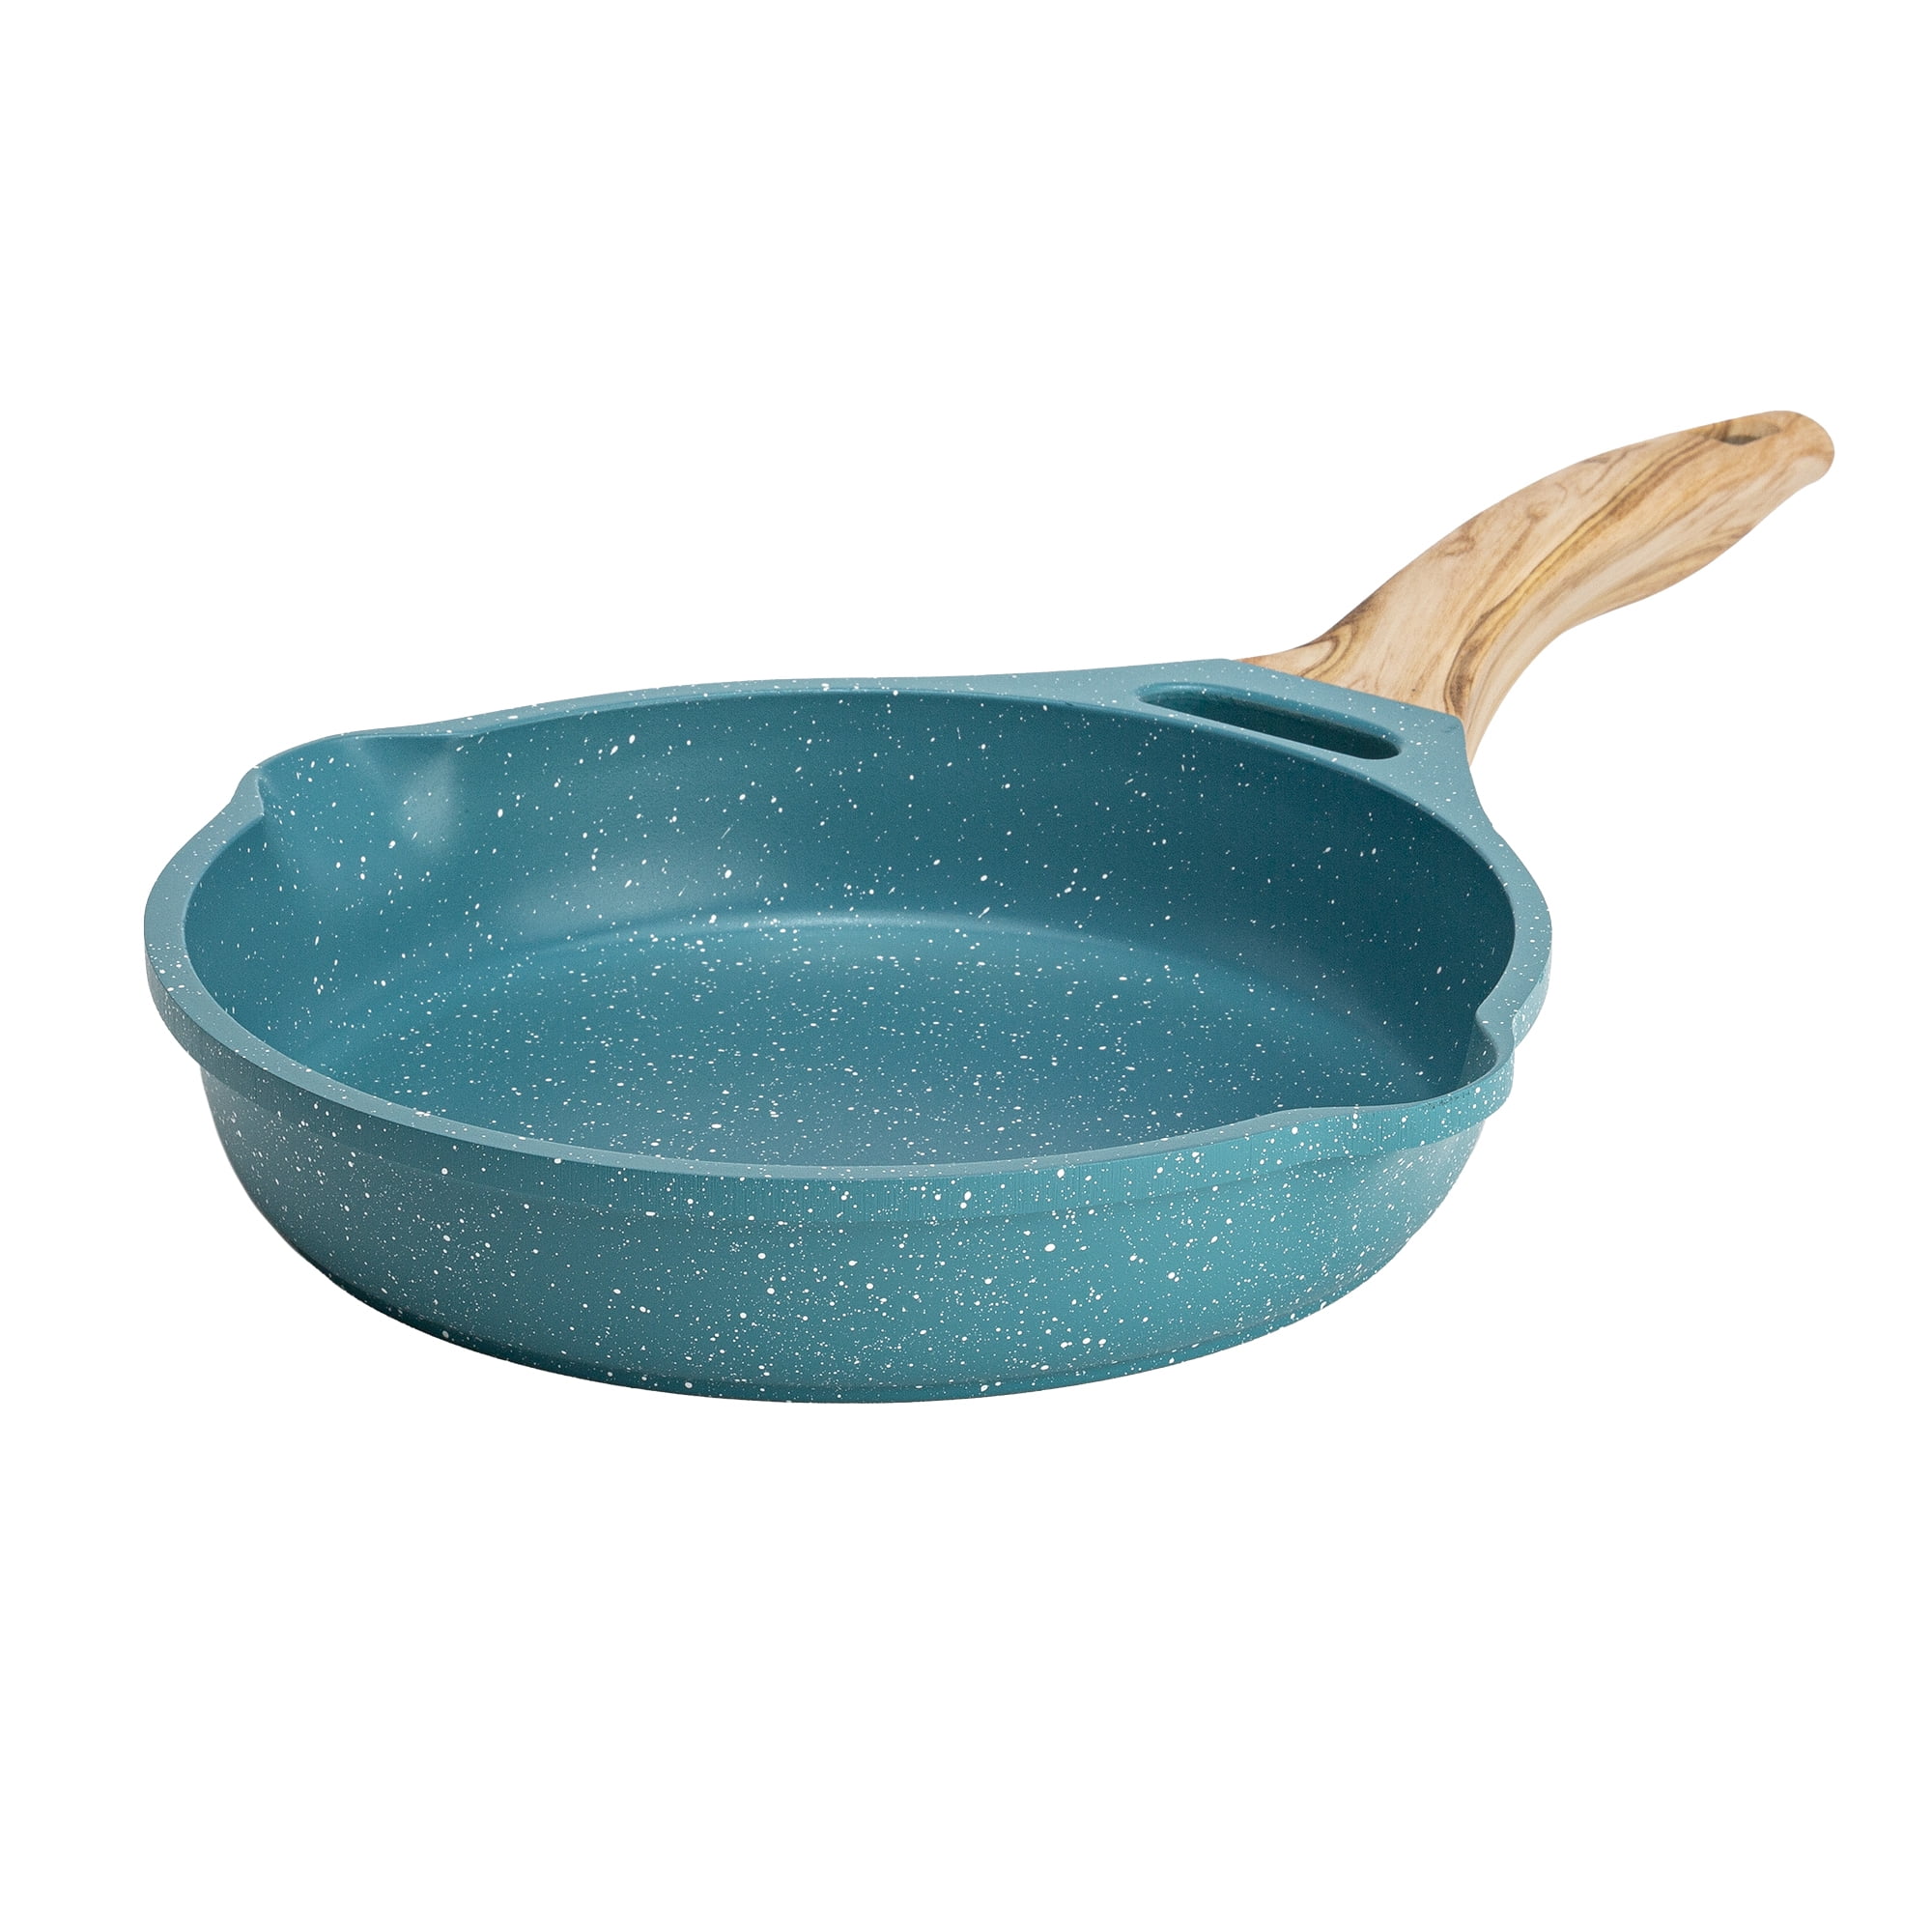 Details about   The Pioneer Women FRYING PAN & SPOONULA  SET  NWT Turquoise 8 inch 